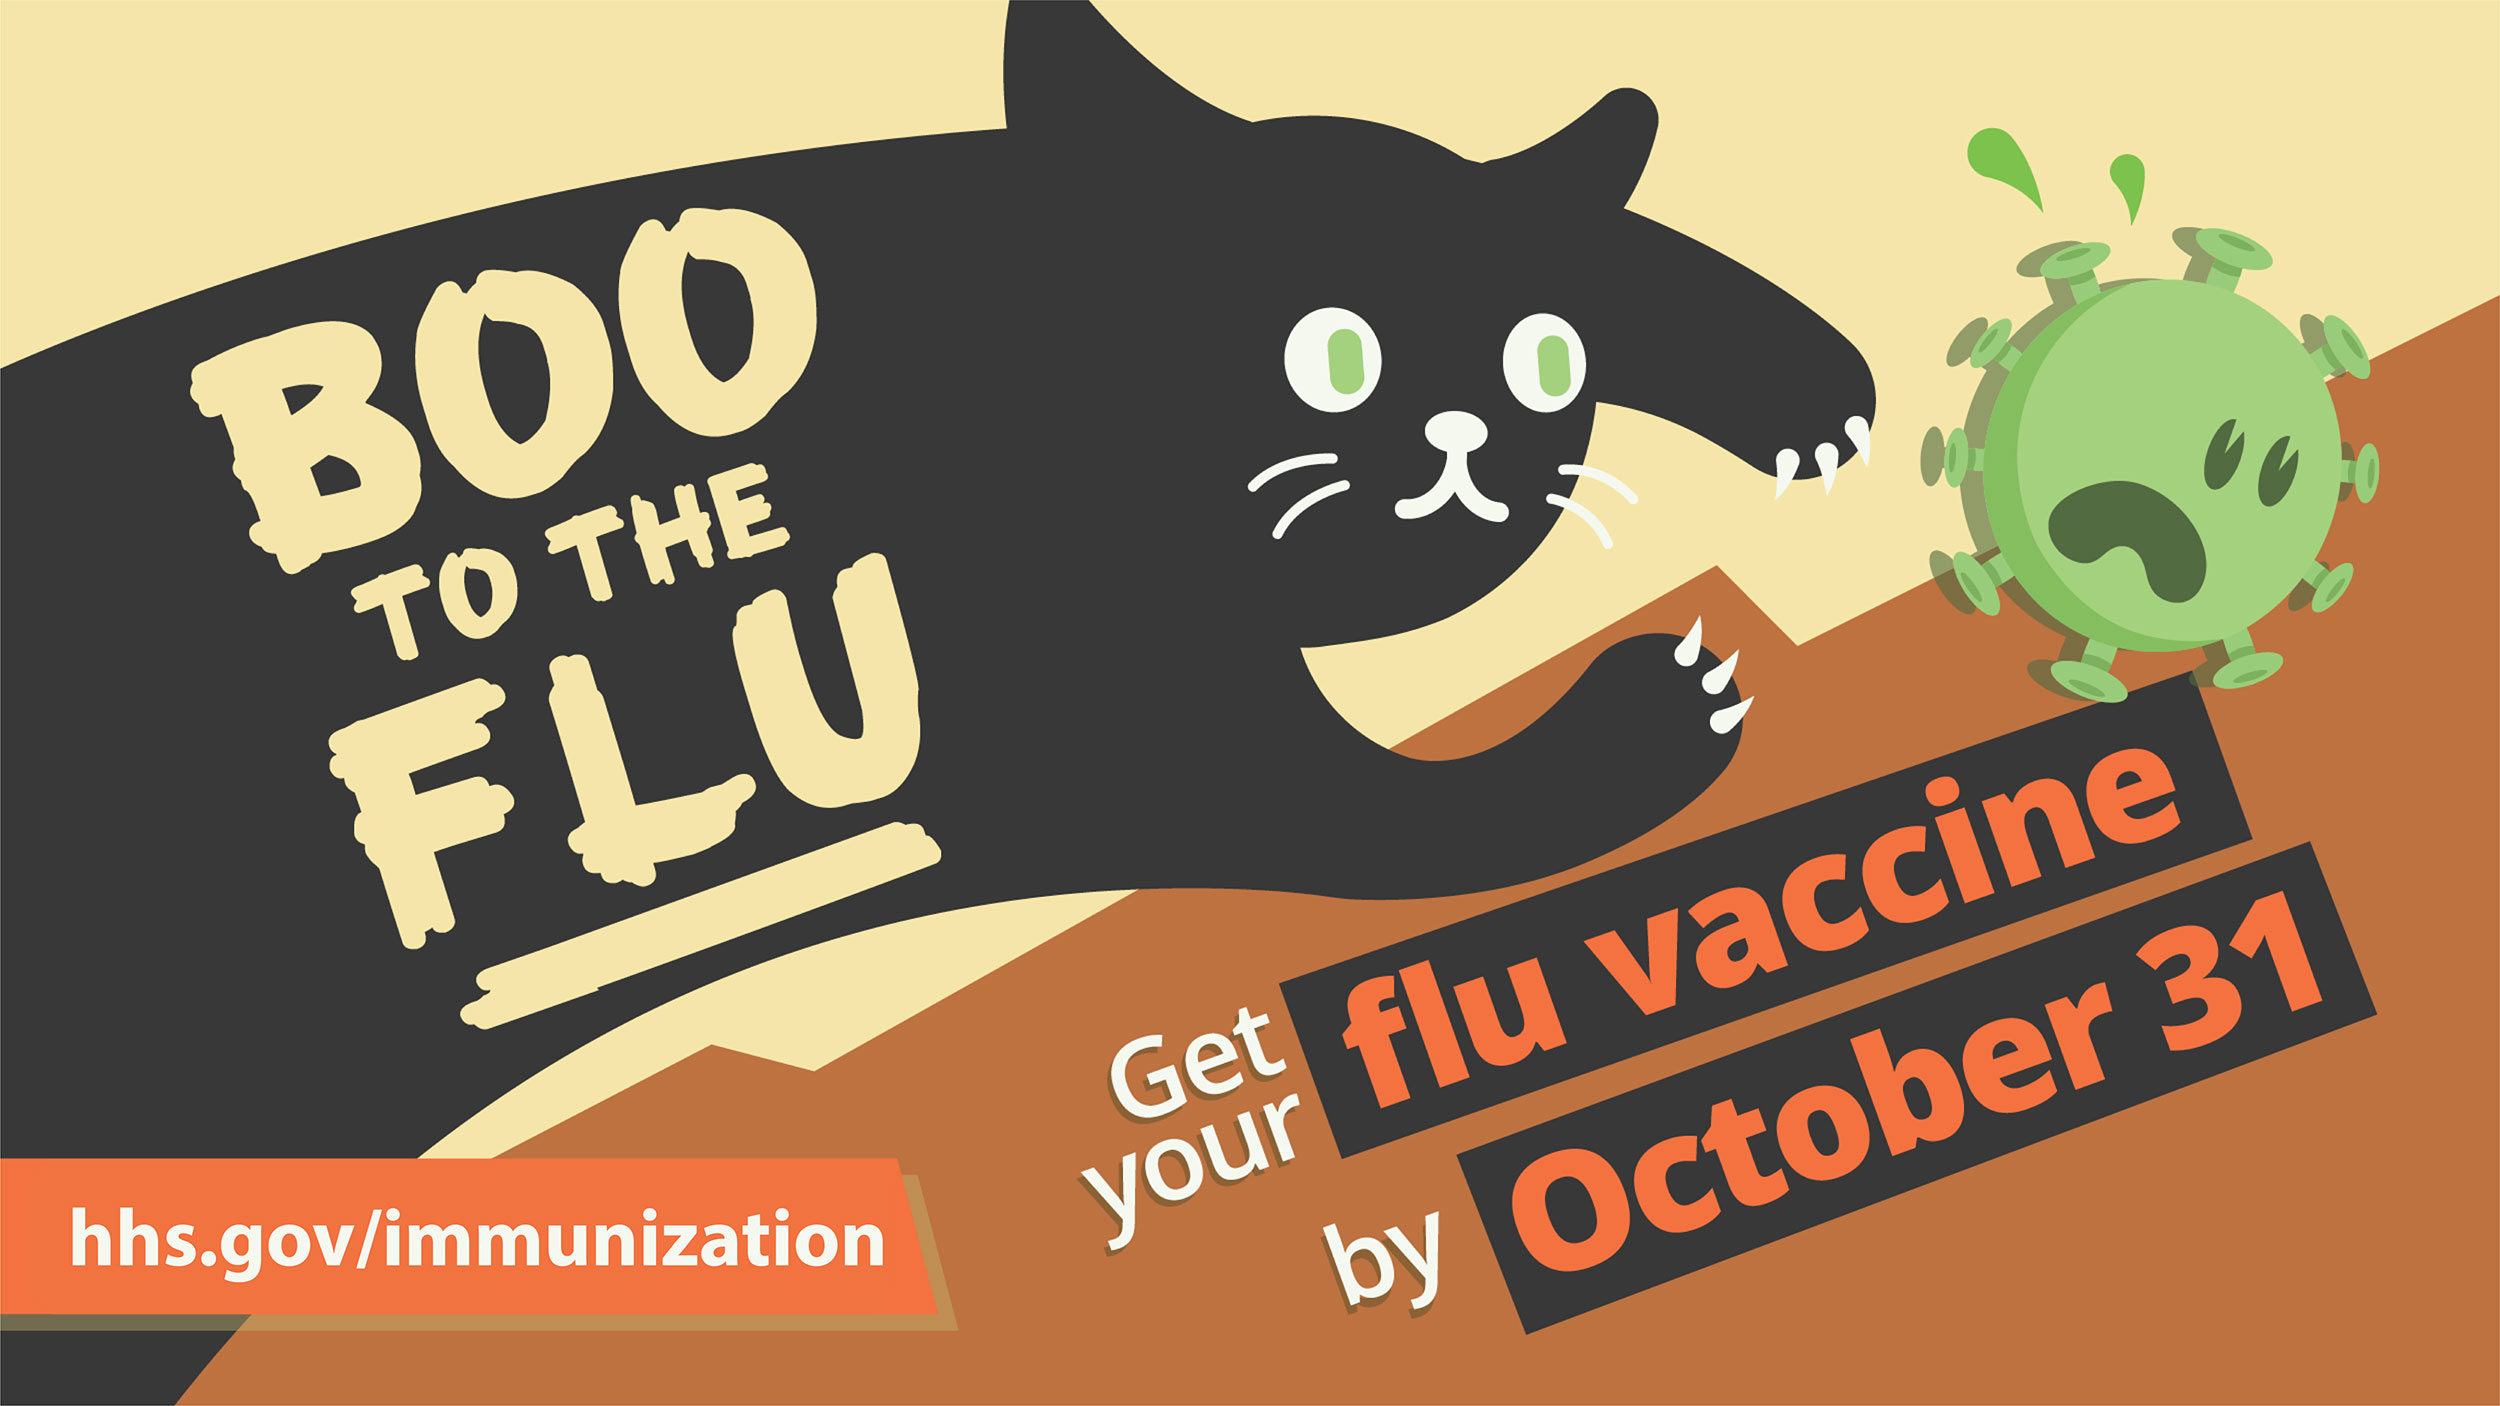 Boo the flu text on the body of a black jumping cat.